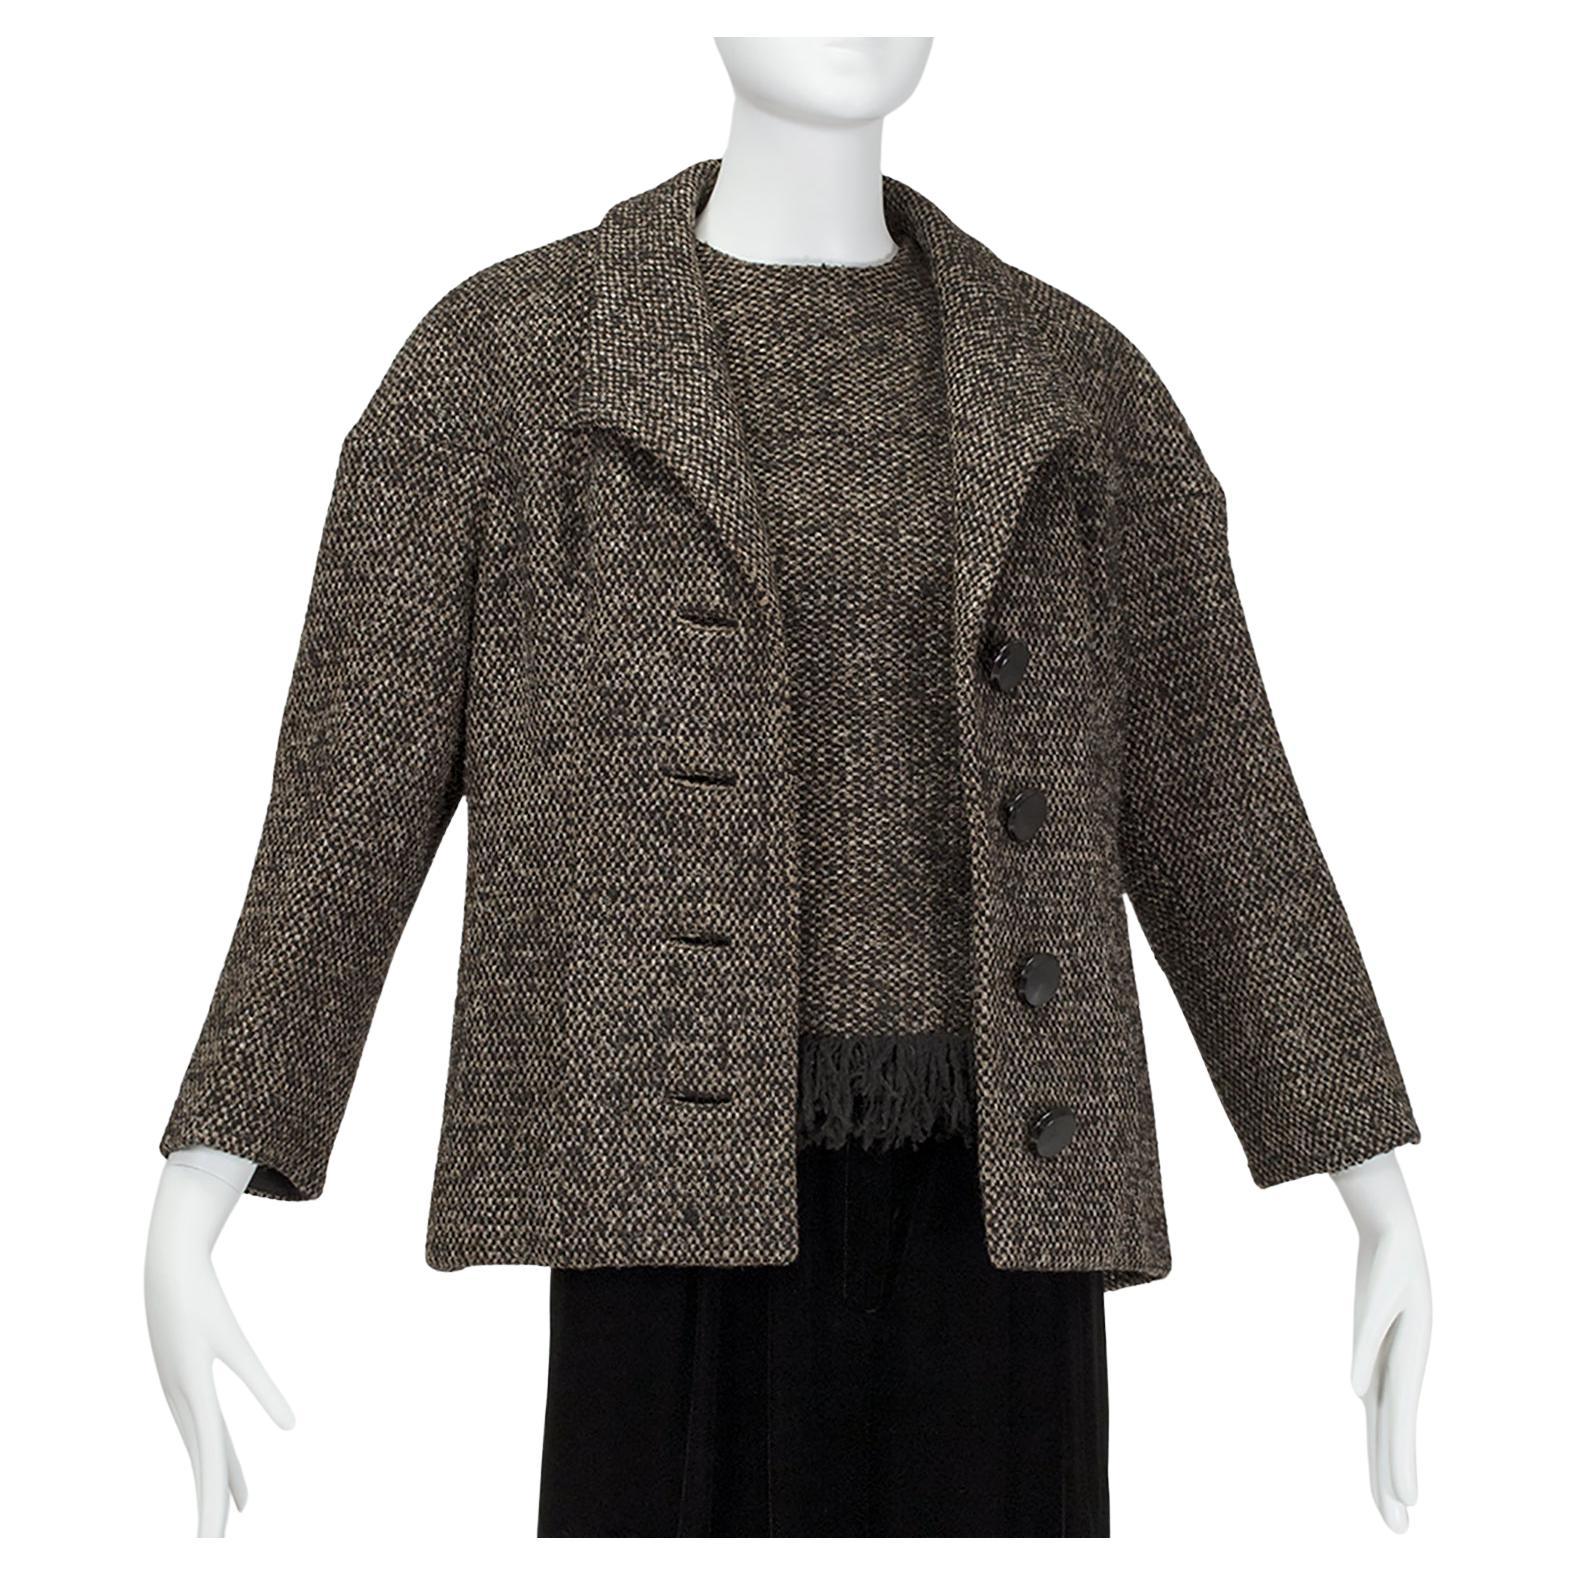 James Galanos Brown Tweed Jacket w Matching Sleeveless Fringe Top - M, 1980s For Sale